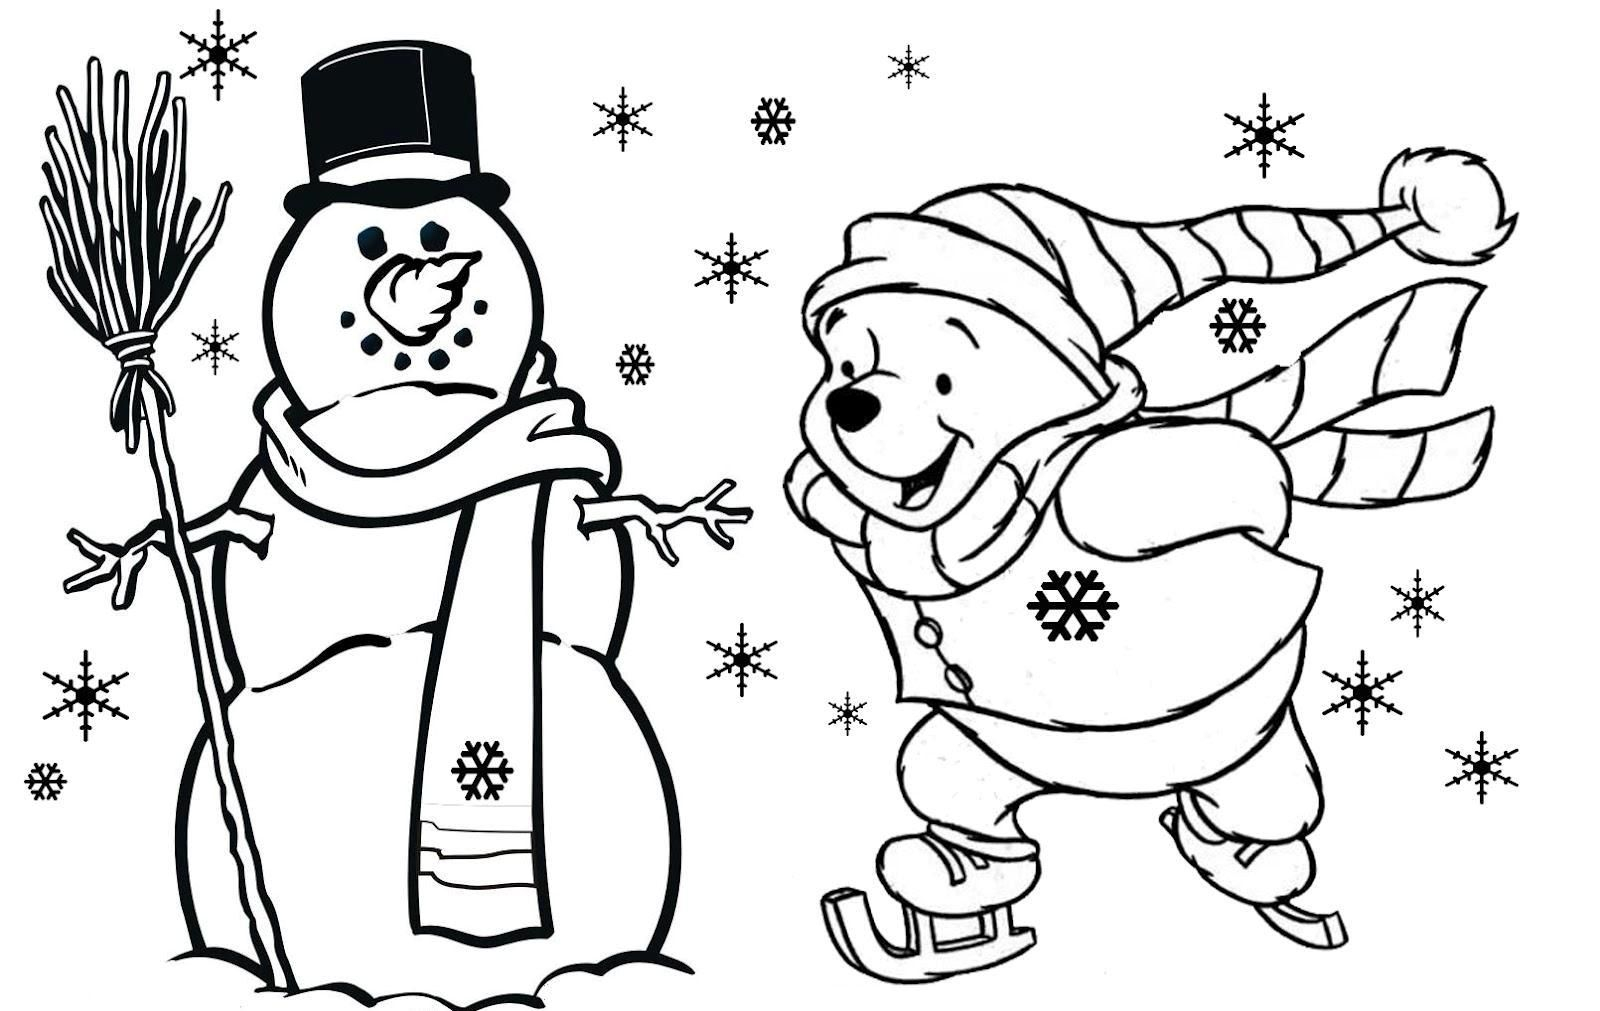 Children's Christmas Coloring Pages Free Coloring Pages Childrens Christmas Coloring Pages Free Printable